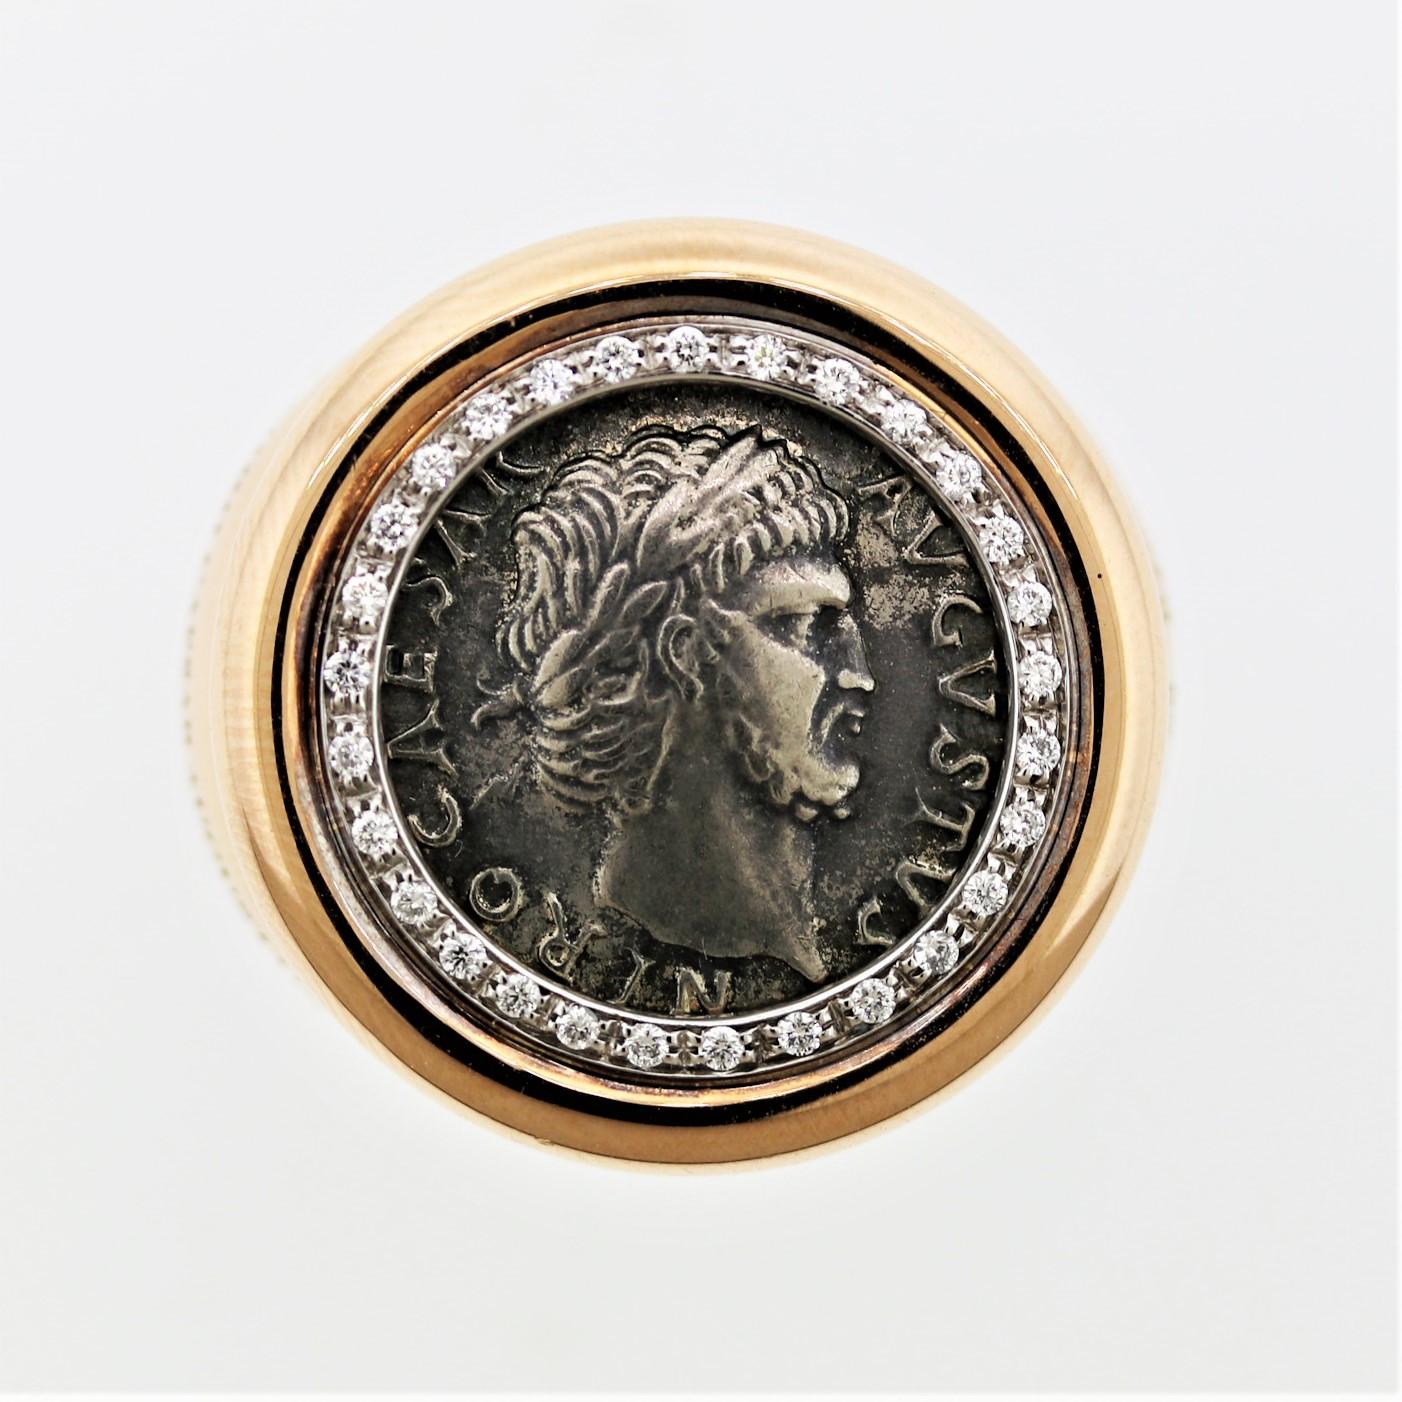 A modern made ring featuring an ancient coin from the year 54 AD, making it close to 2000 years old! It is the coin of Nero the last Caesar of Rome from the year 54-68. It is complemented by round brilliant-cut diamonds set around the coin adding a